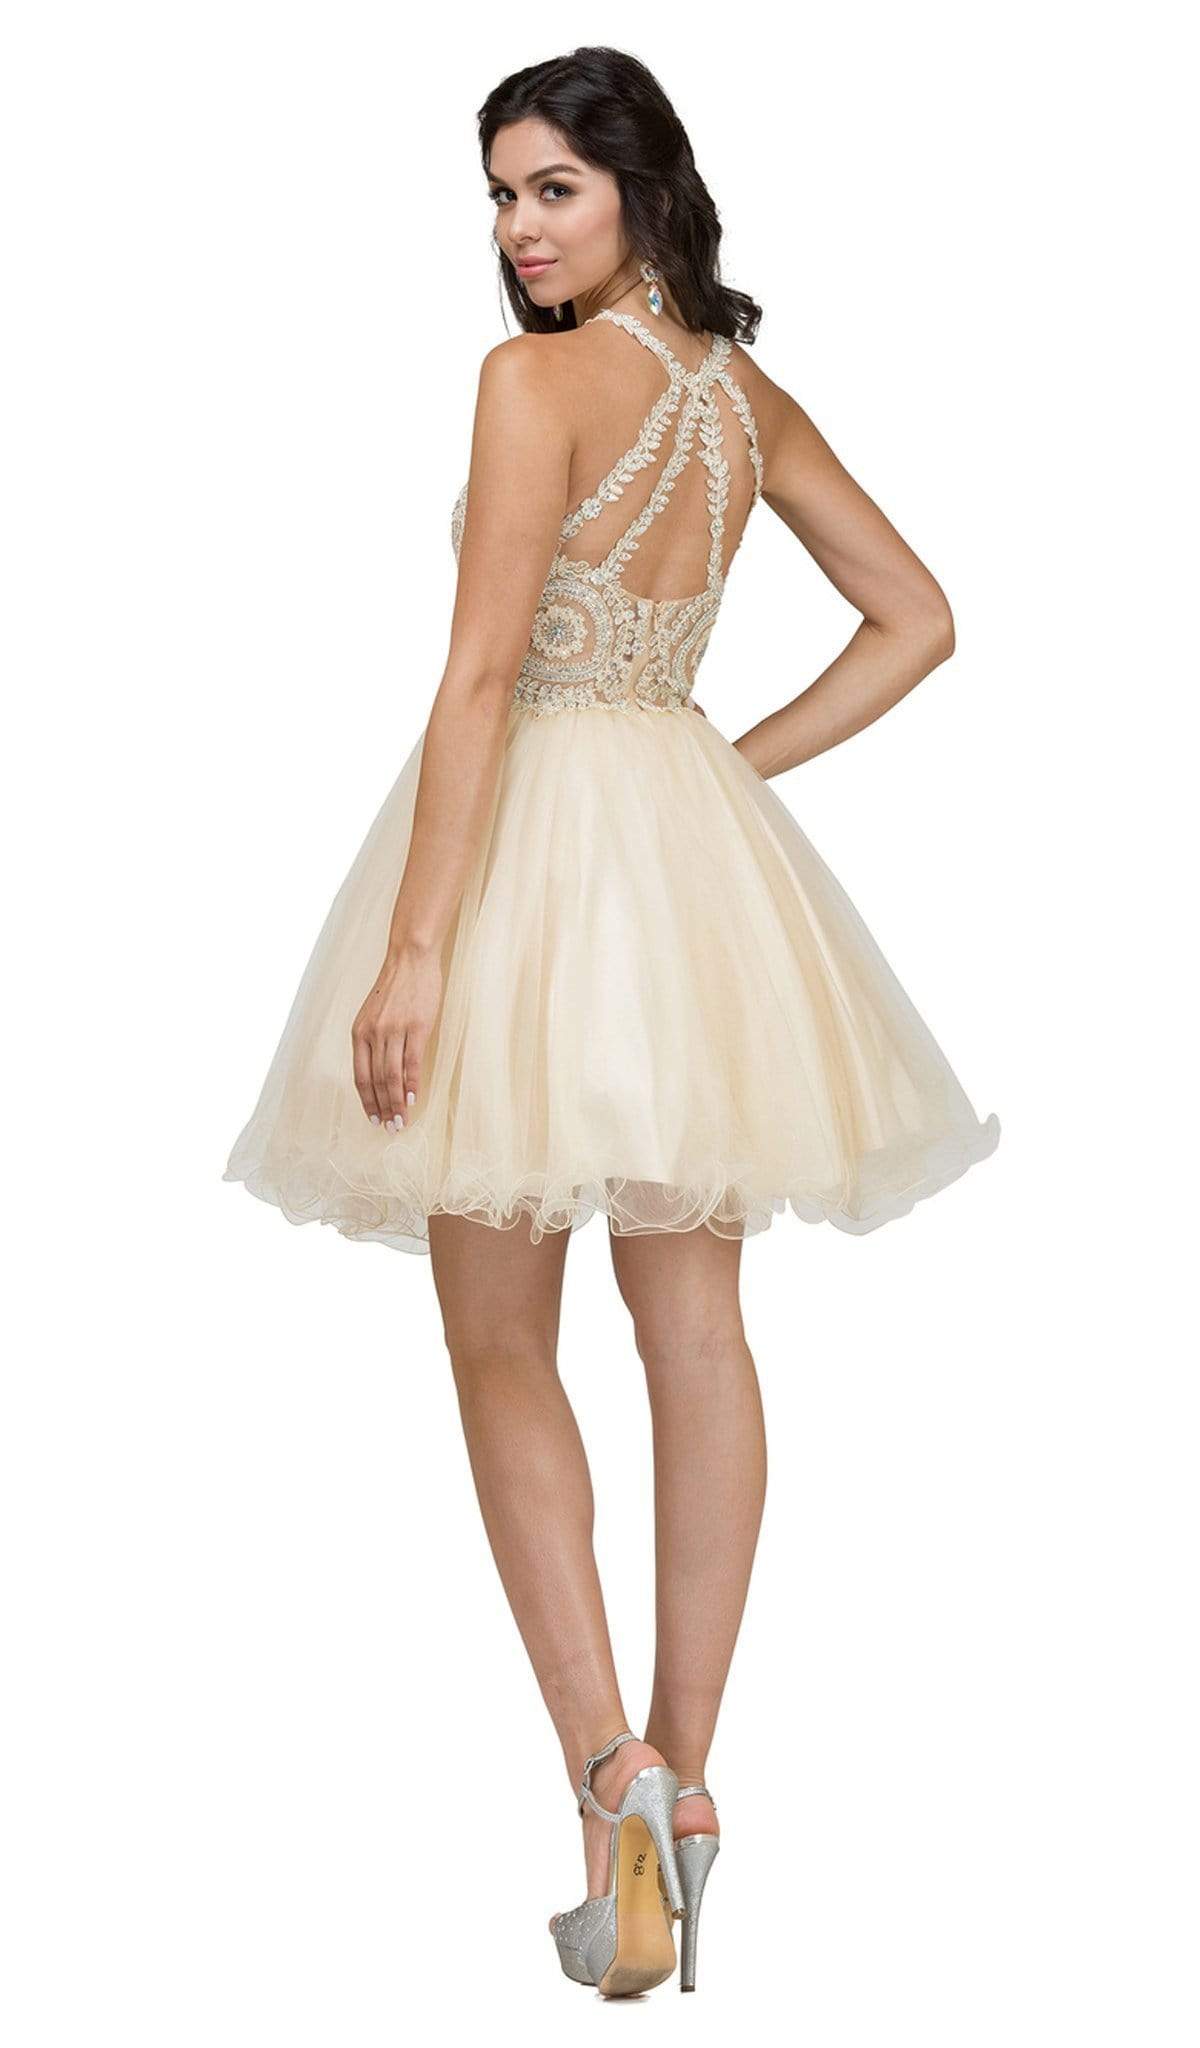 Dancing Queen - 2156 Halter Floral Appliques Tulle Cocktail Dress Special Occasion Dress XS / Champagne